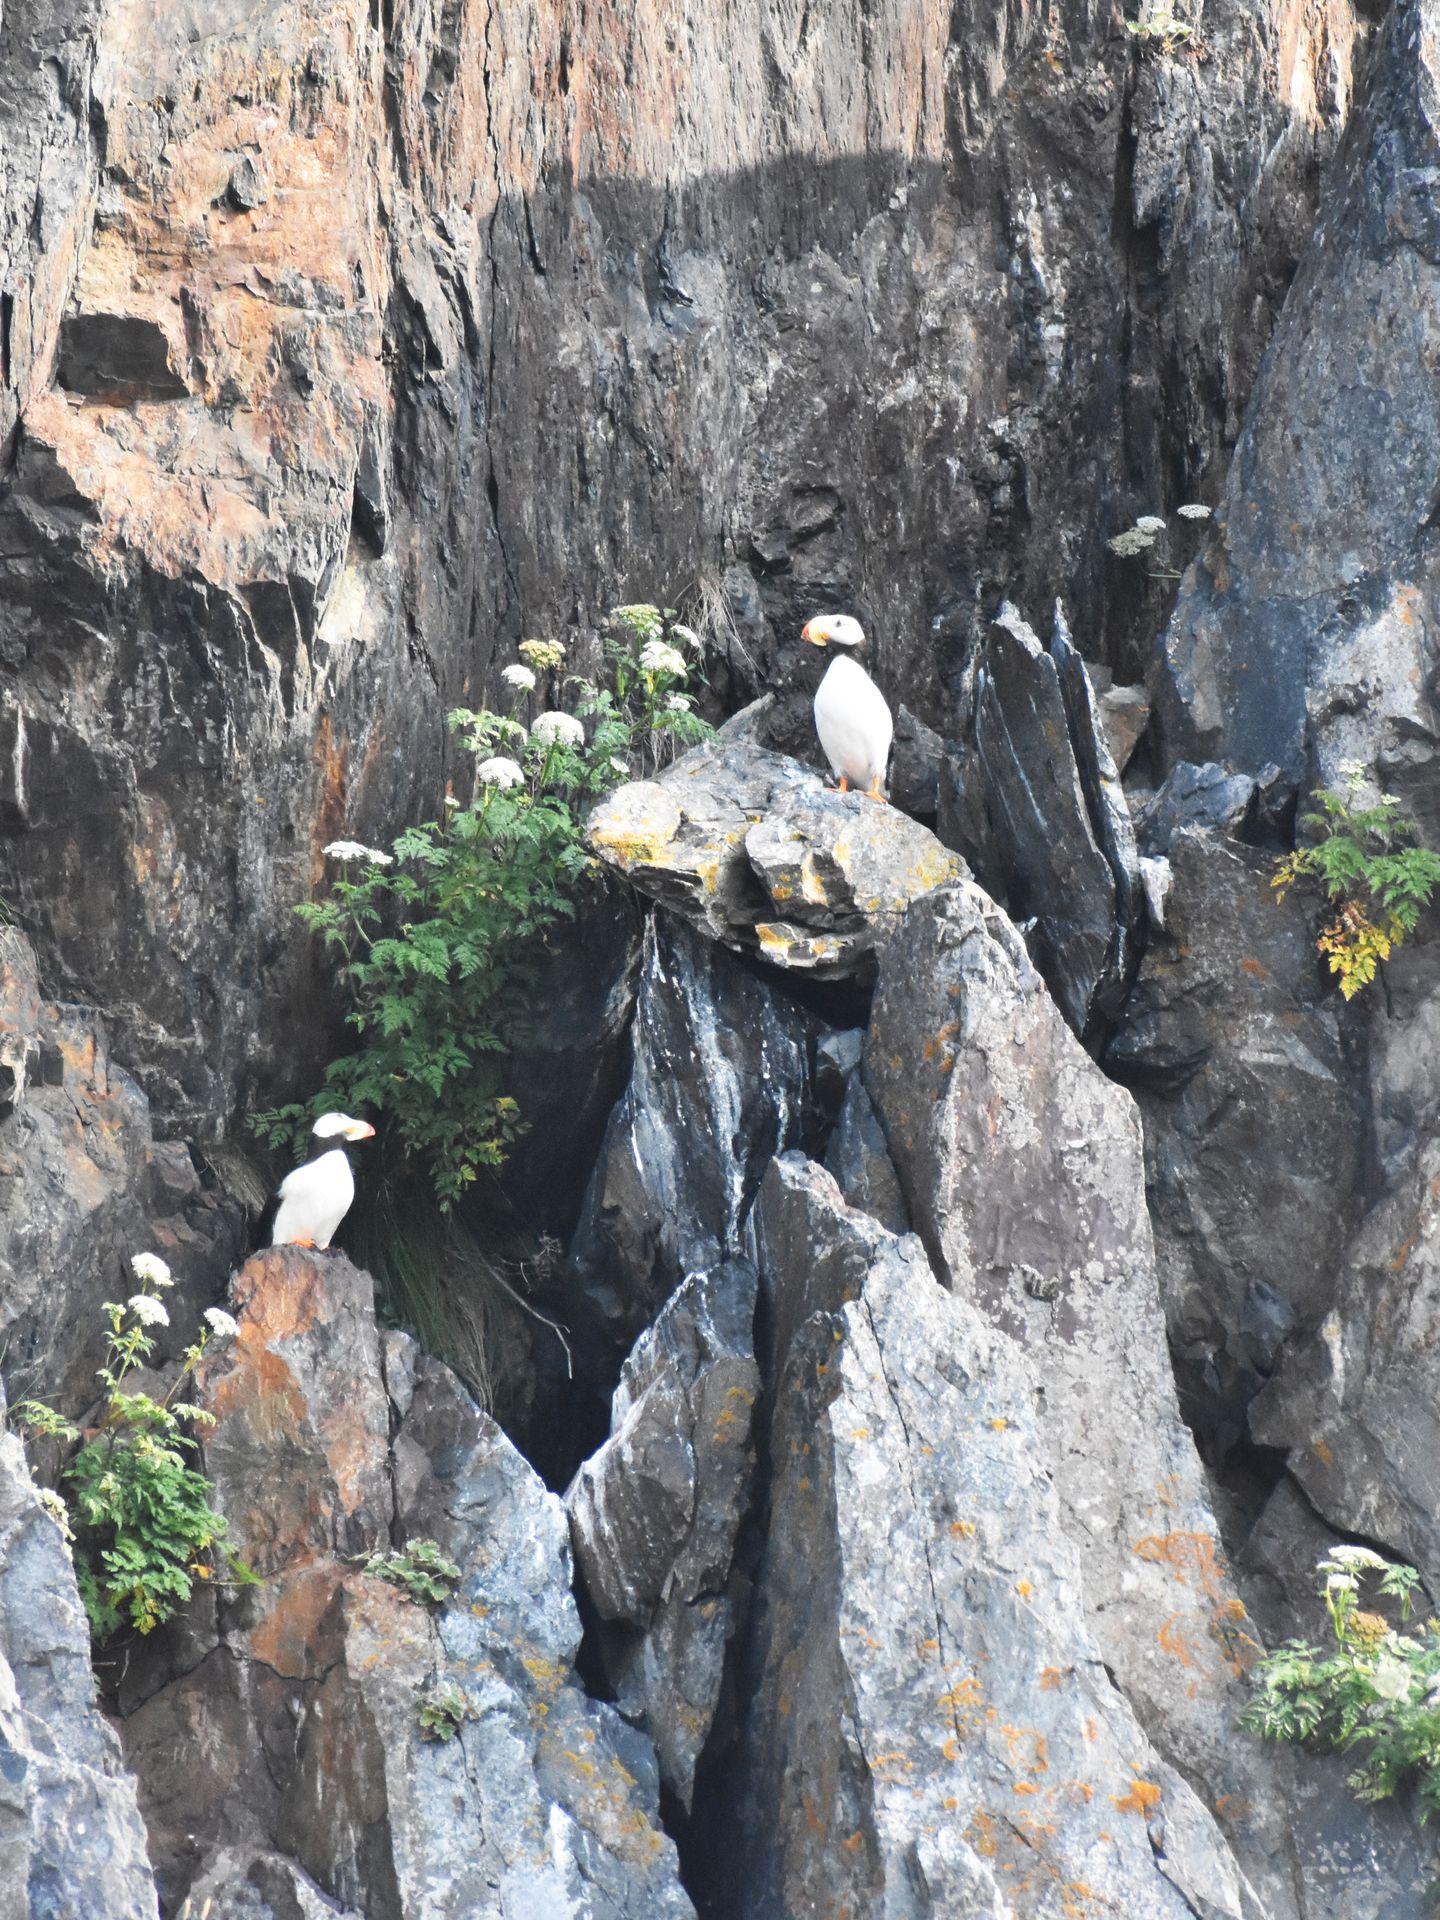 Some puffins sitting on rocks at the Cove of the Spires.